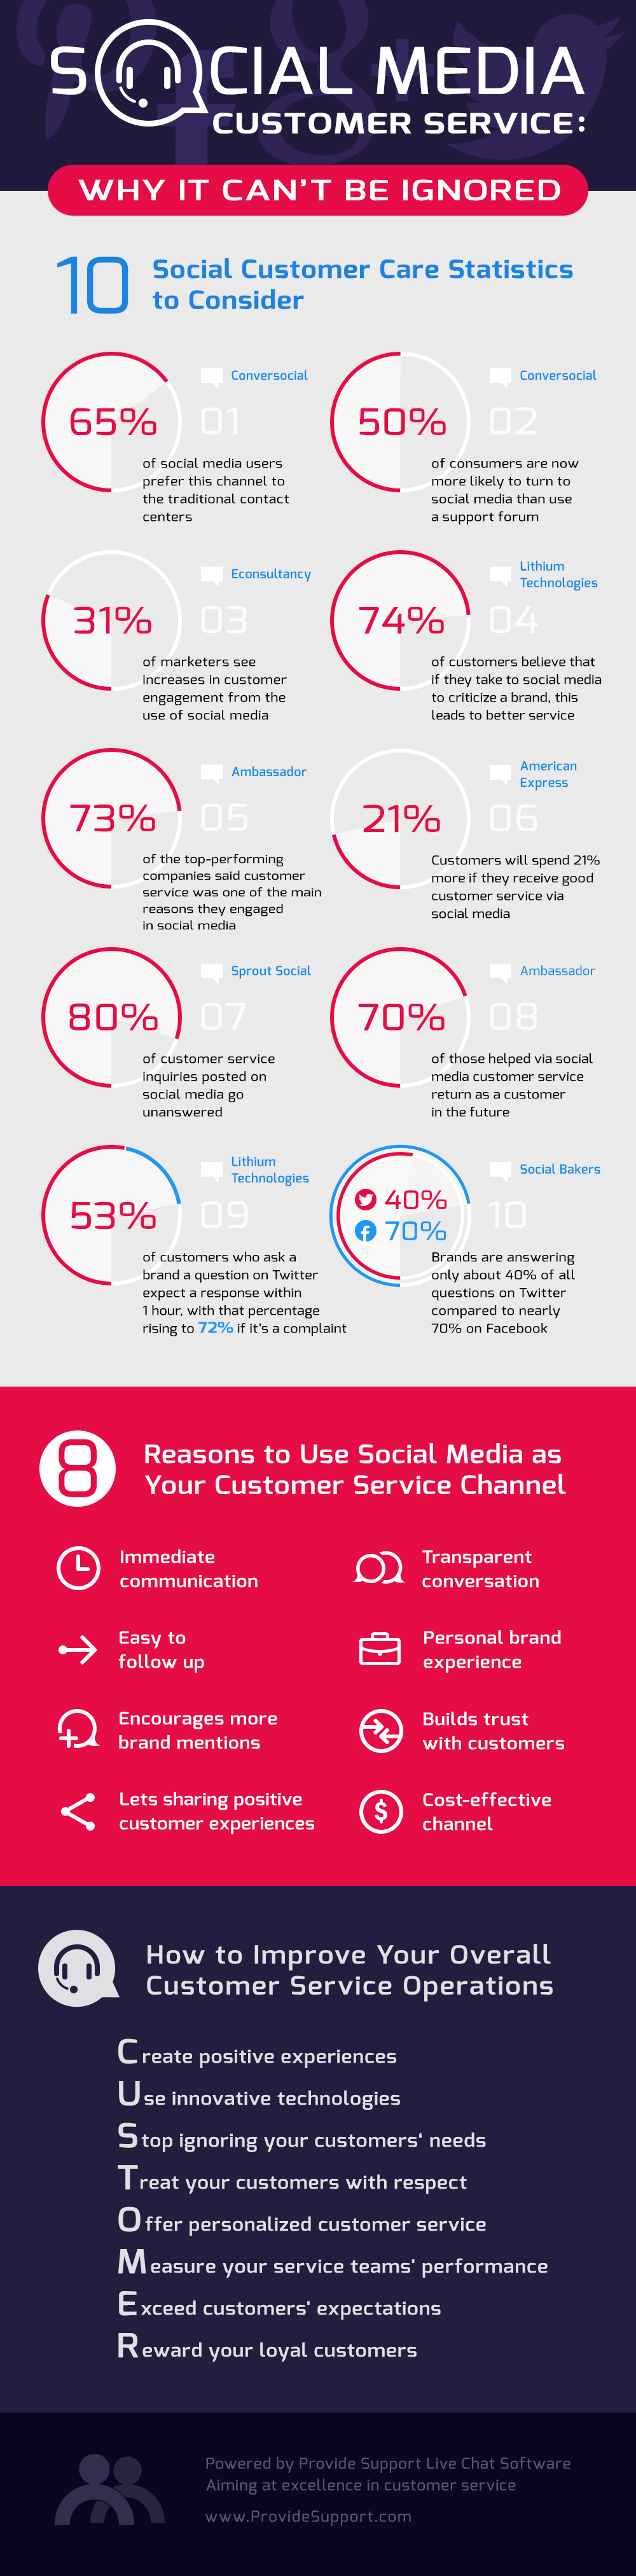 Social Media Customer Service: Why It Can't Be Ignored [Inforgraphic from Provide Support]